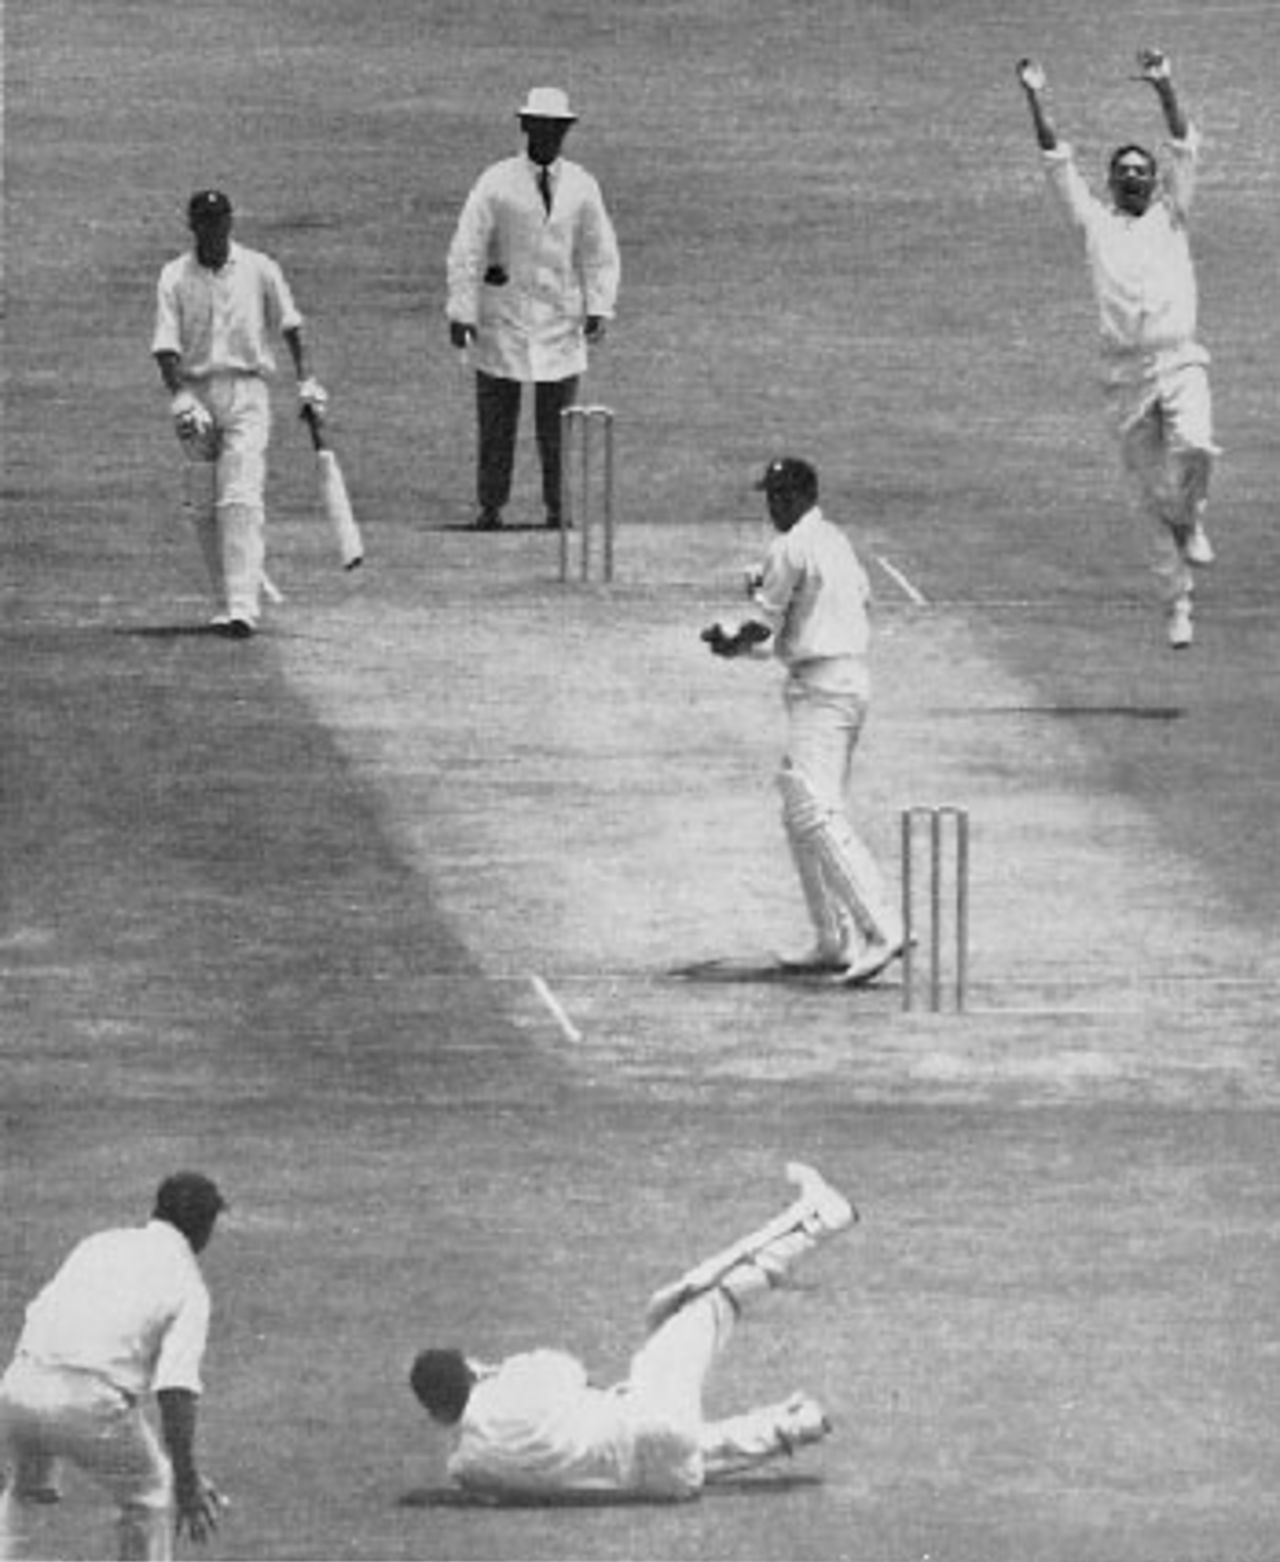 Jim Parks dives to catch Graeme Pollock off John Price, South Africa v England, 4th Test, January 23, 1965